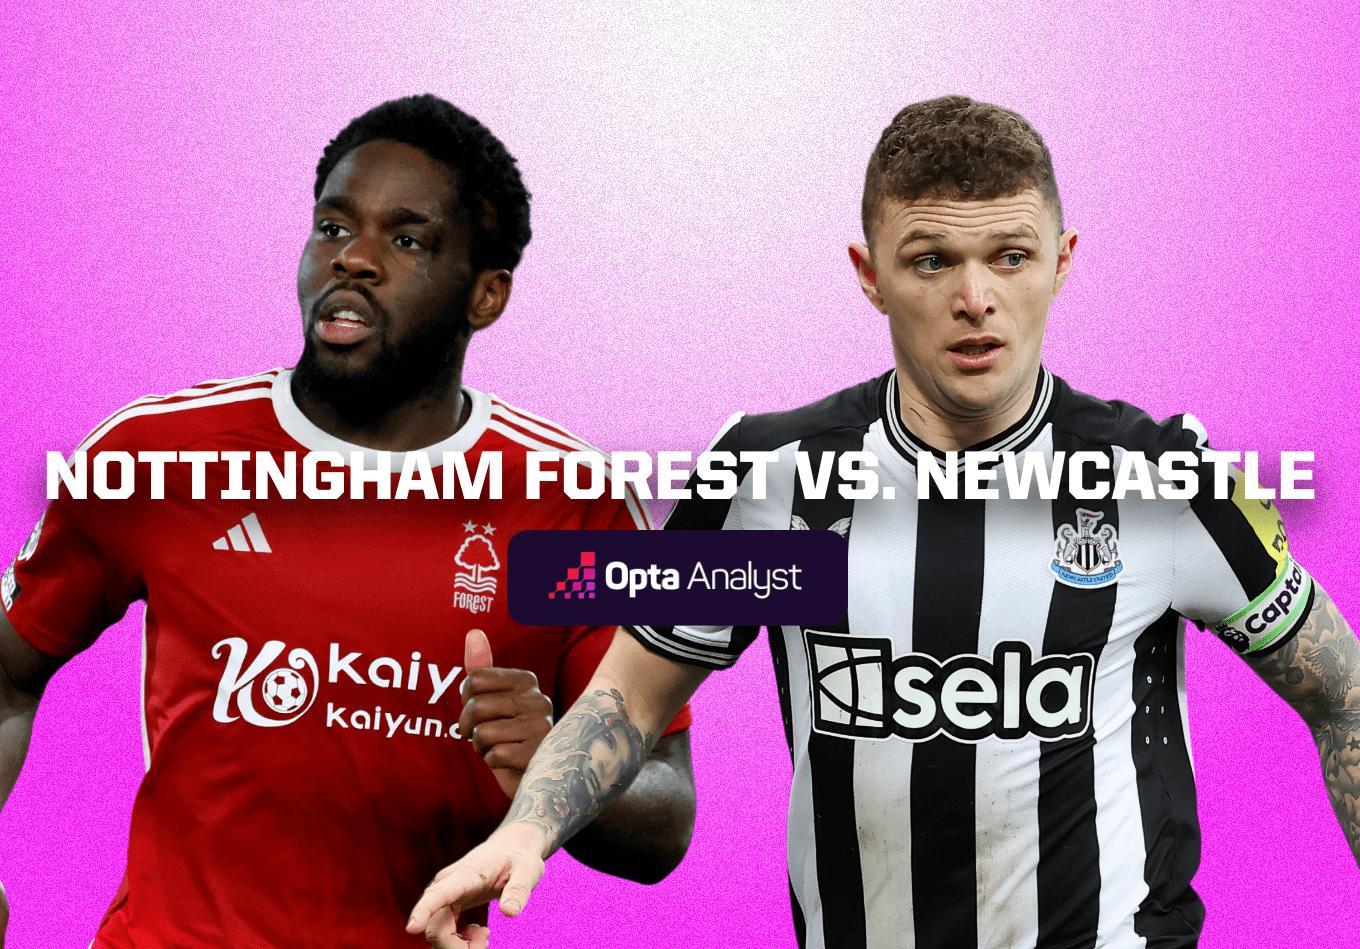 Nottingham Forest vs Newcastle: Prediction and Preview